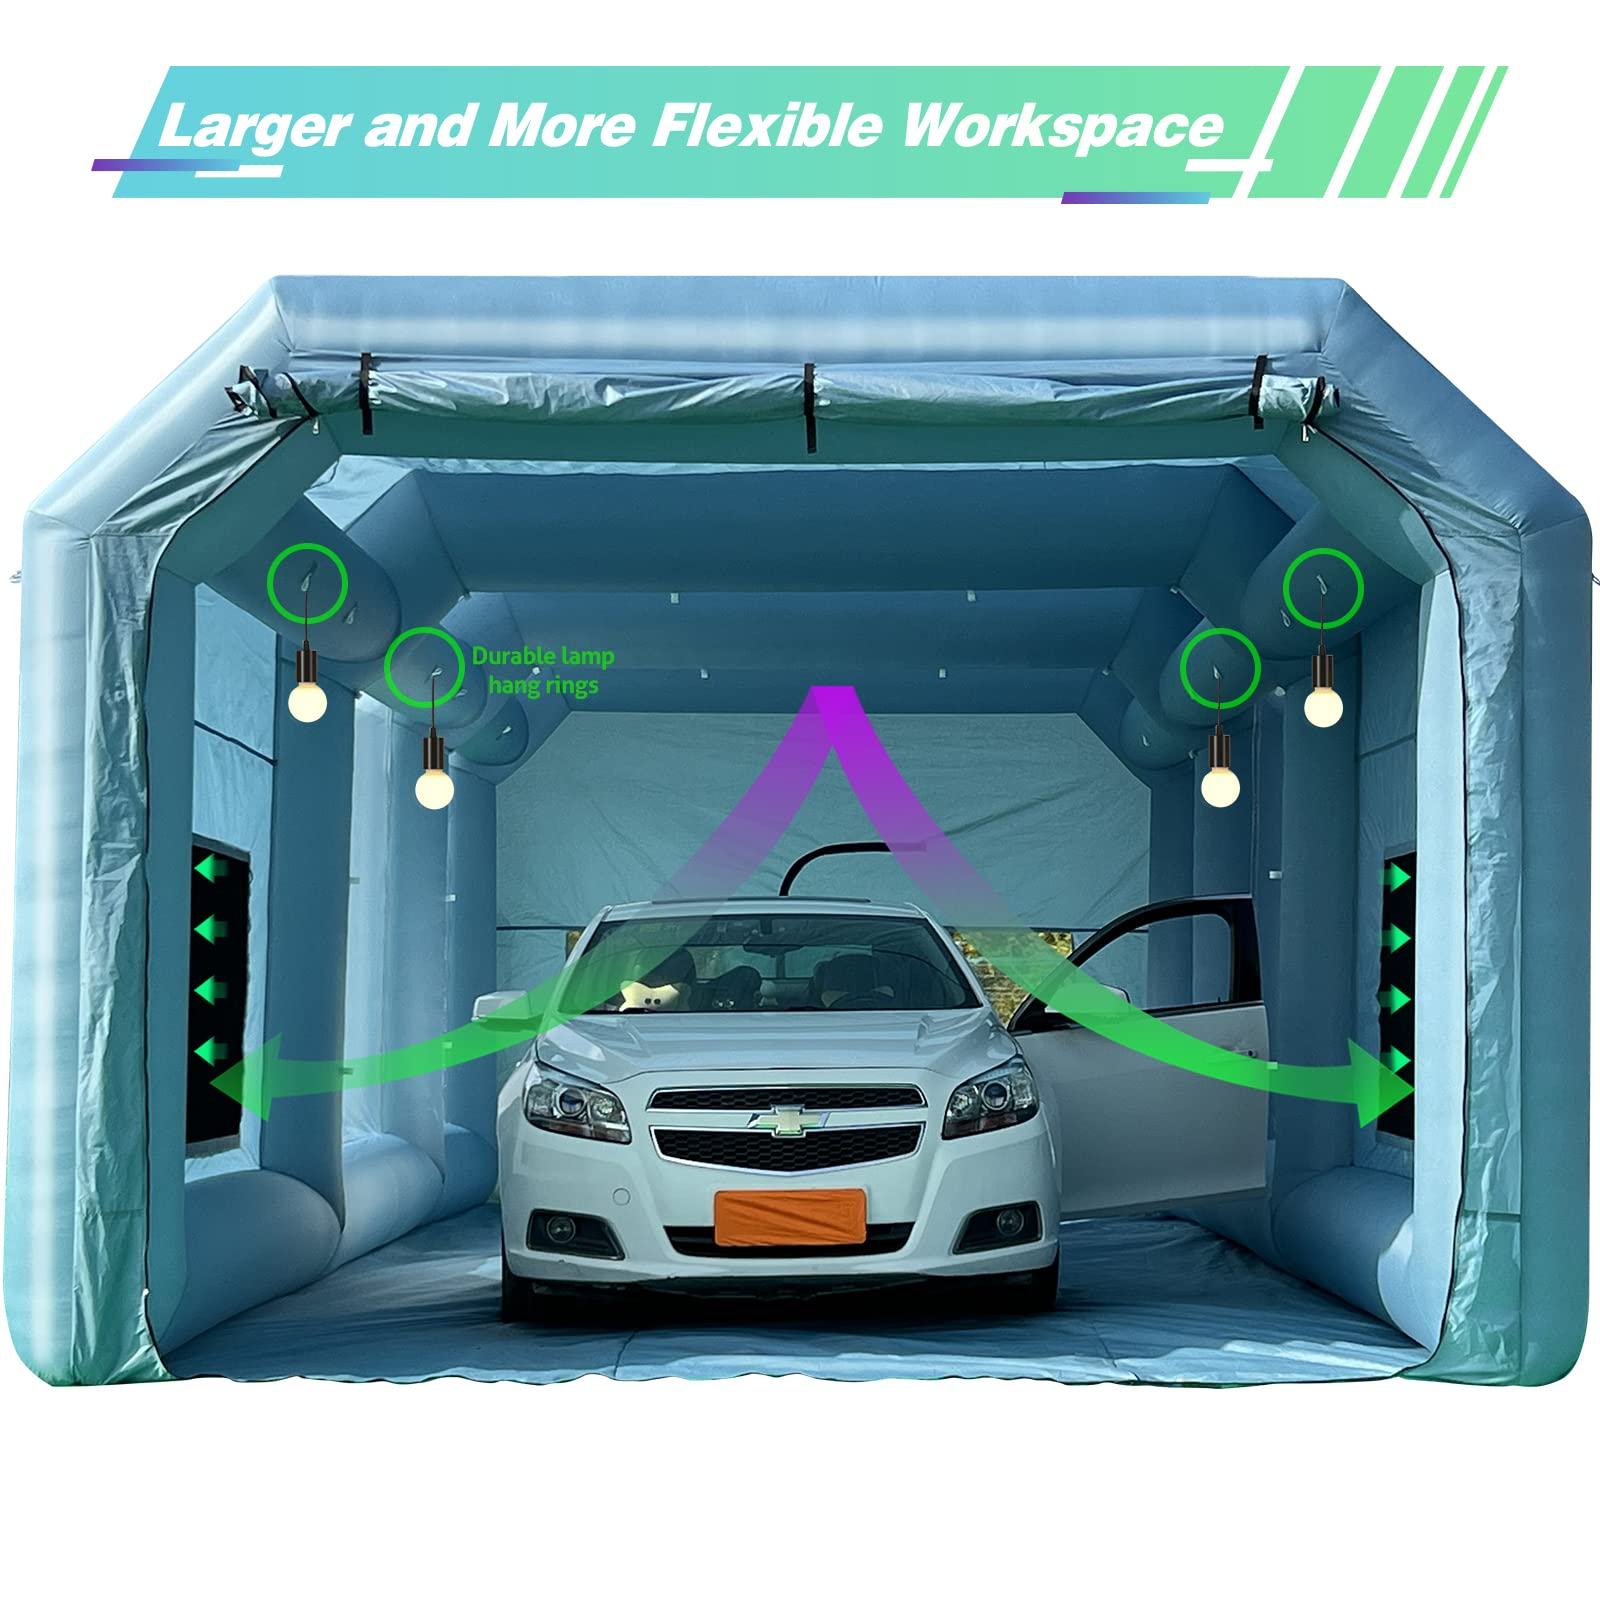 TKLoop Portable Inflatable Paint Booth 30x18x12Ft with 2 Blowers Inflatable Spray Booth with Air Filter System, Blow Up Spray Booth Tent - No Tool Room(750W+1100W)